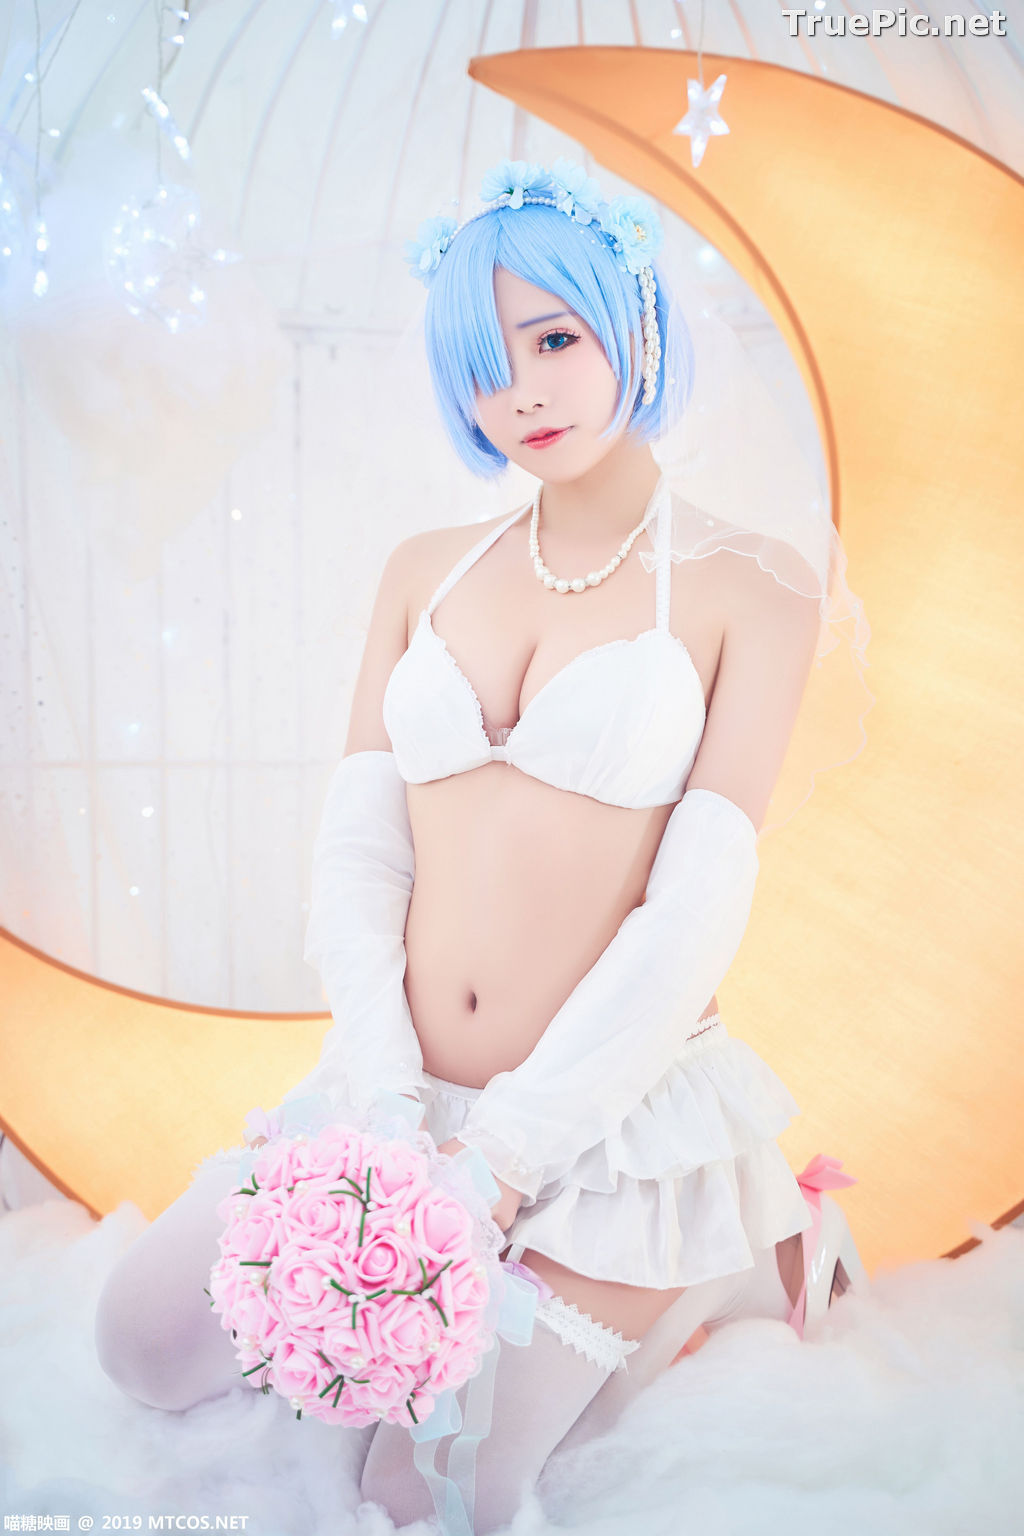 Image [MTCos] 喵糖映画 Vol.043 – Chinese Cute Model – Sexy Rem Cosplay - TruePic.net - Picture-7